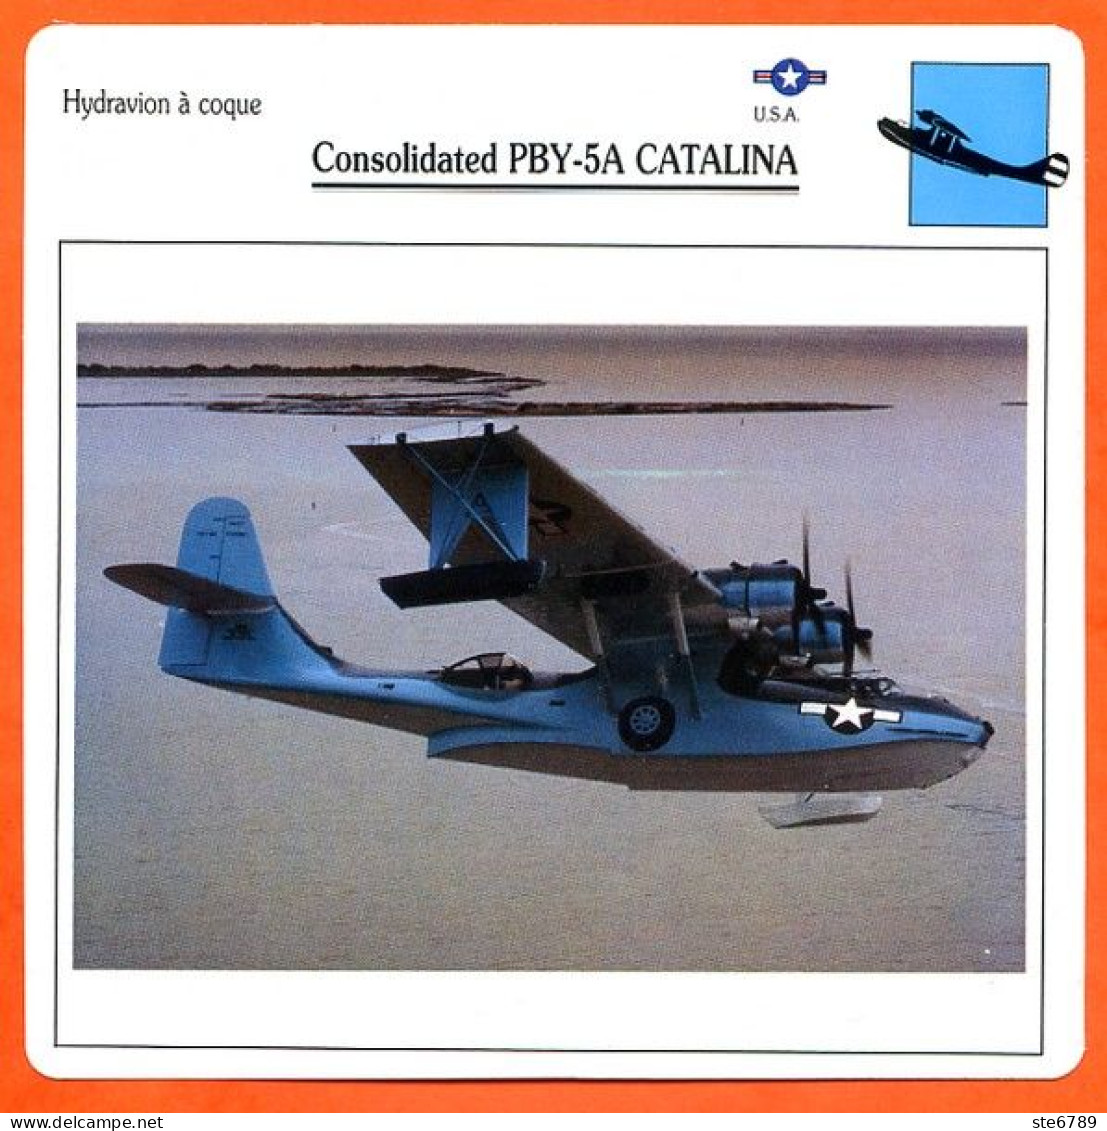 Fiche Aviation Consolidated PBY 5A CATALINA / Hydravion A Coque USA Avions - Flugzeuge